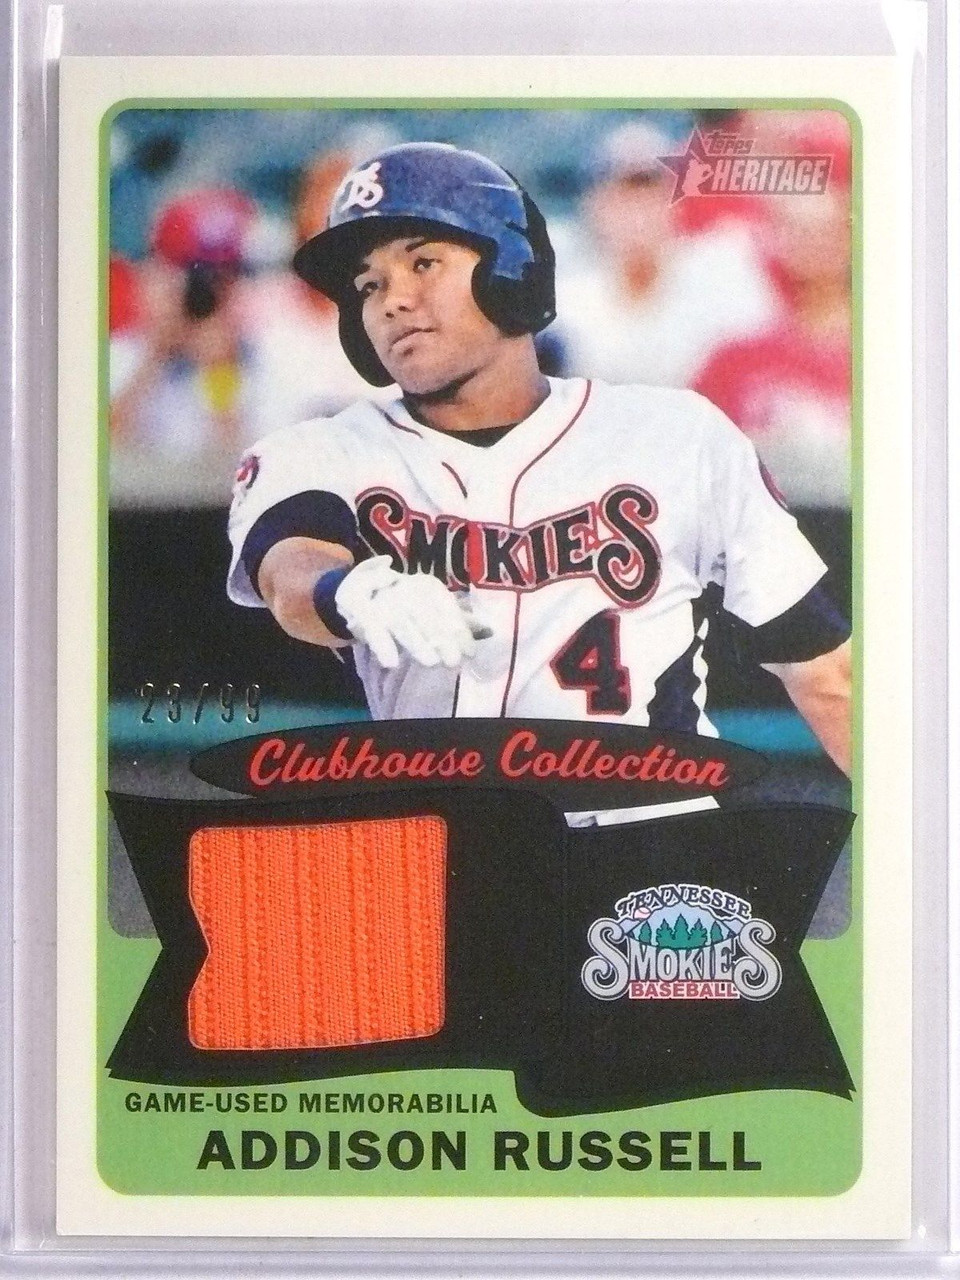 2014 Topps Heritage Clubhouse Collection Addison Russell Jersey #D23/99  *67000 - Sportsnut Cards